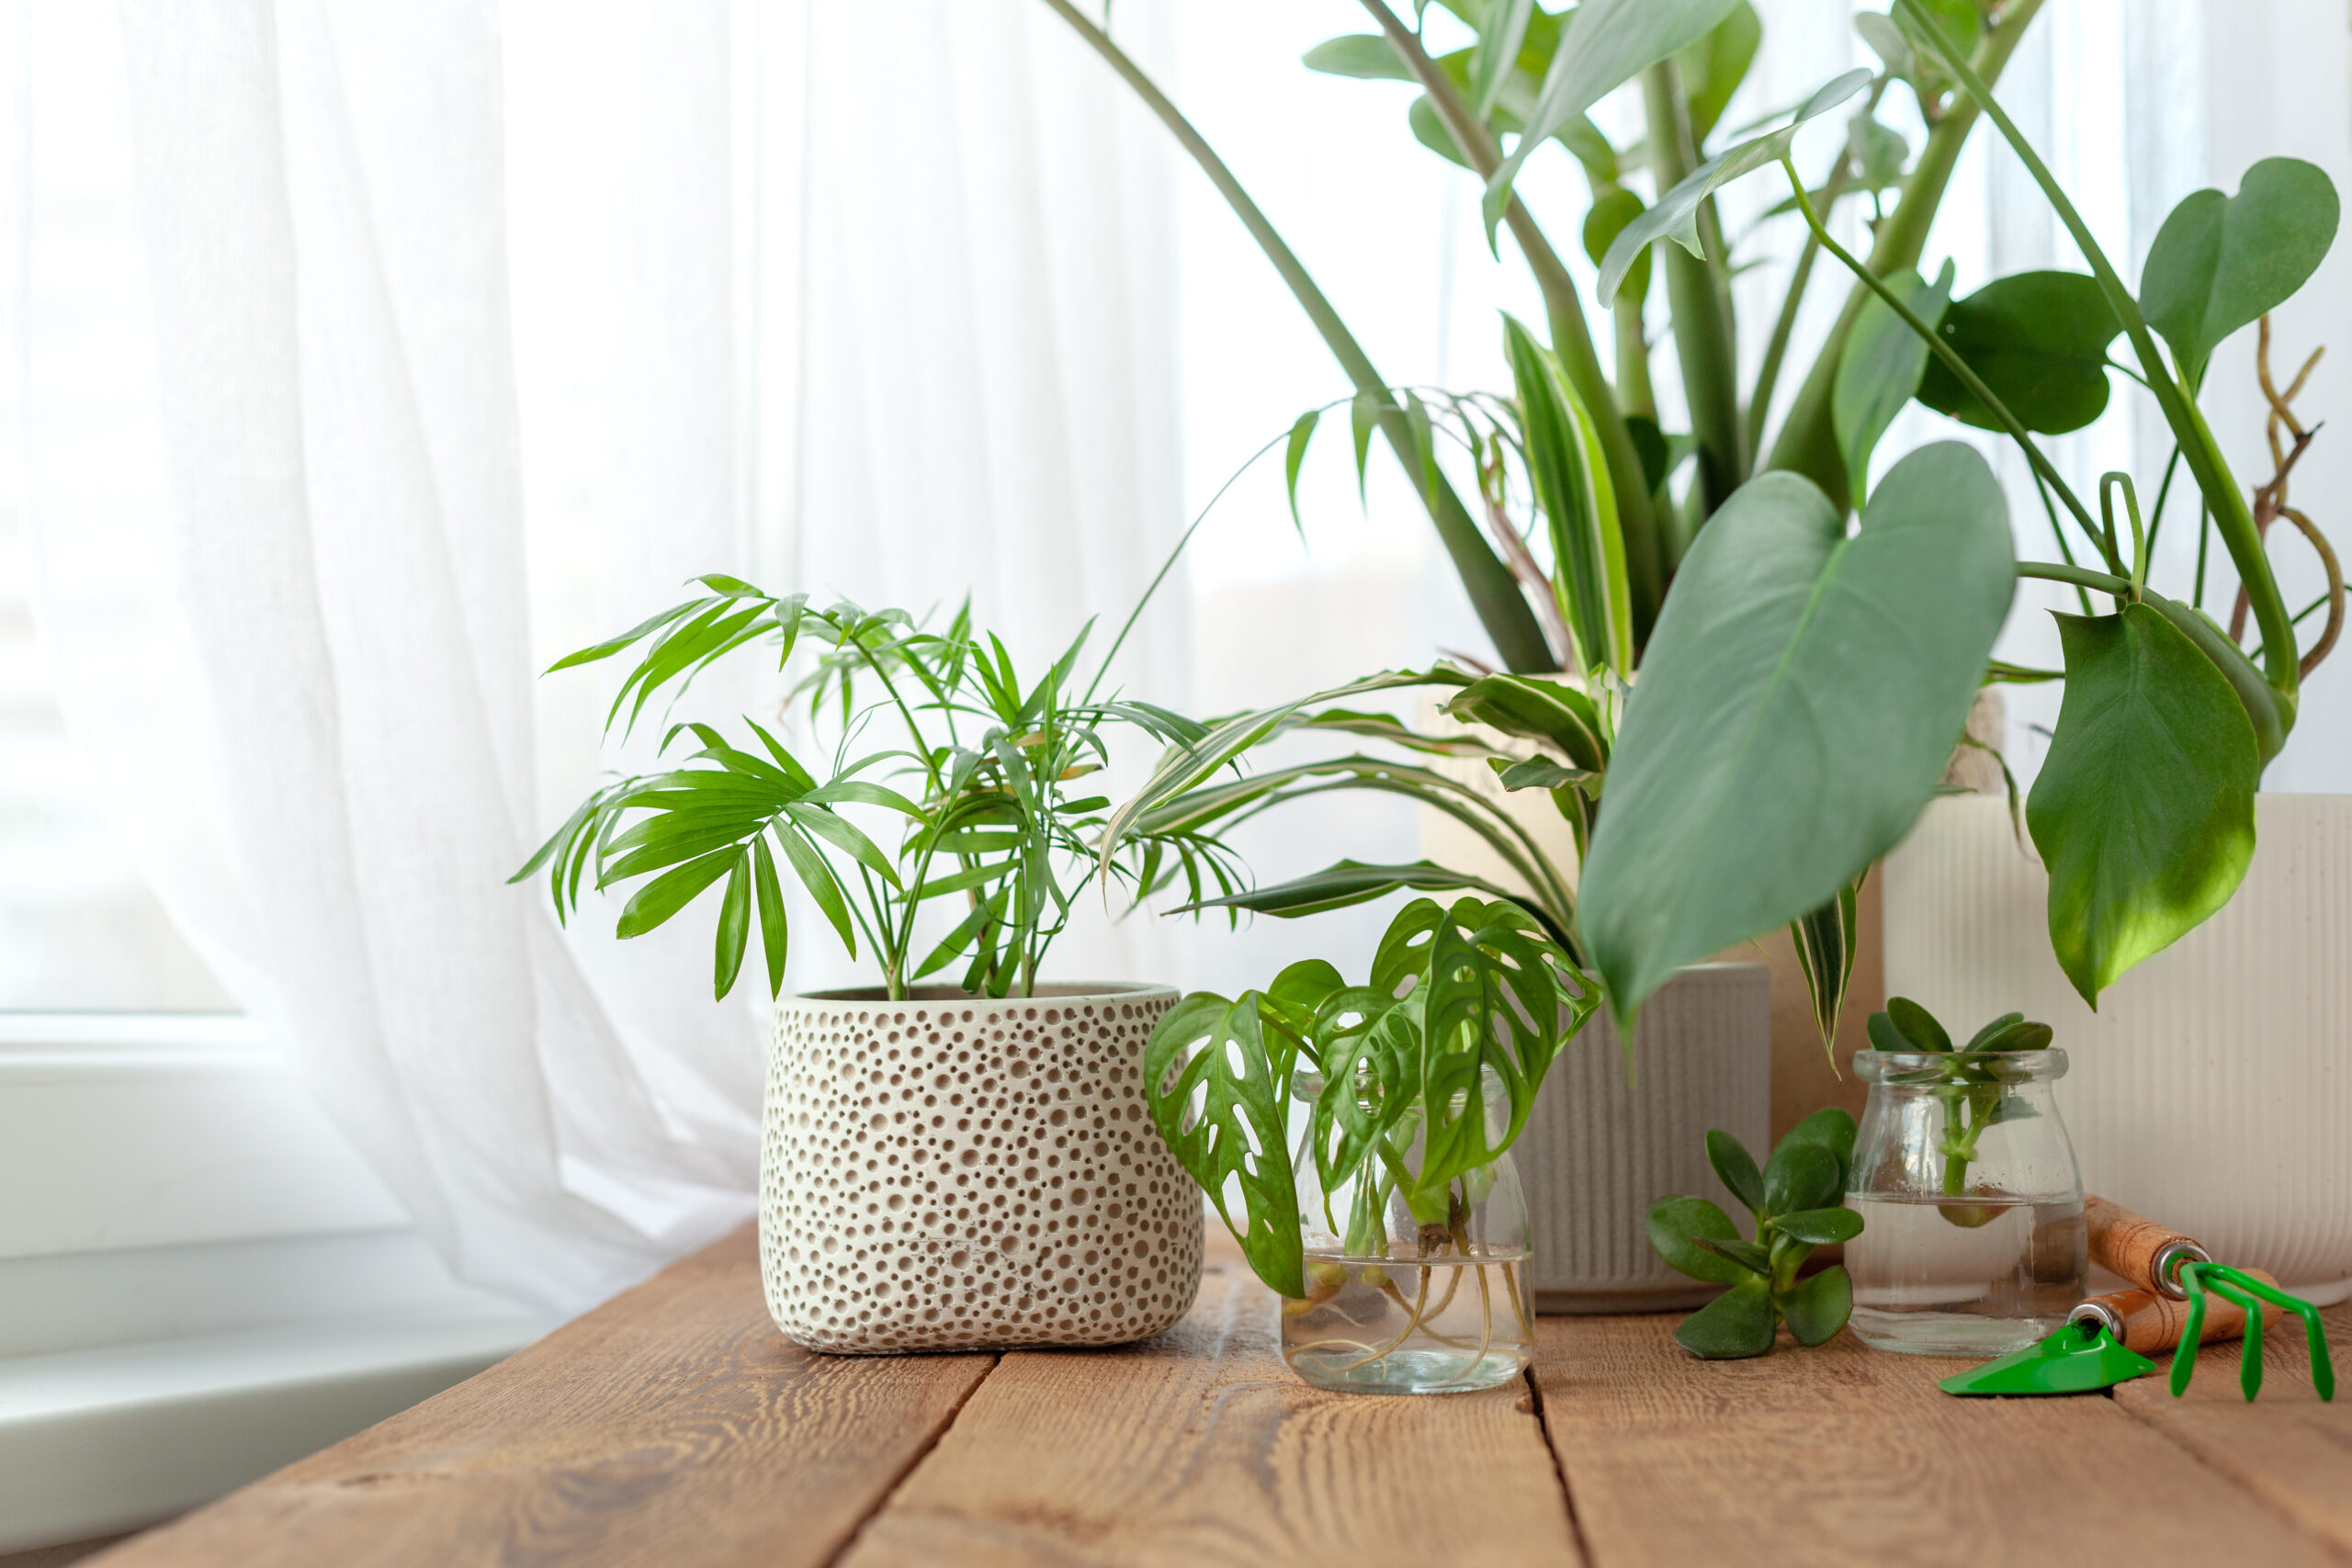 How To Purify Your Home’s Air Naturally